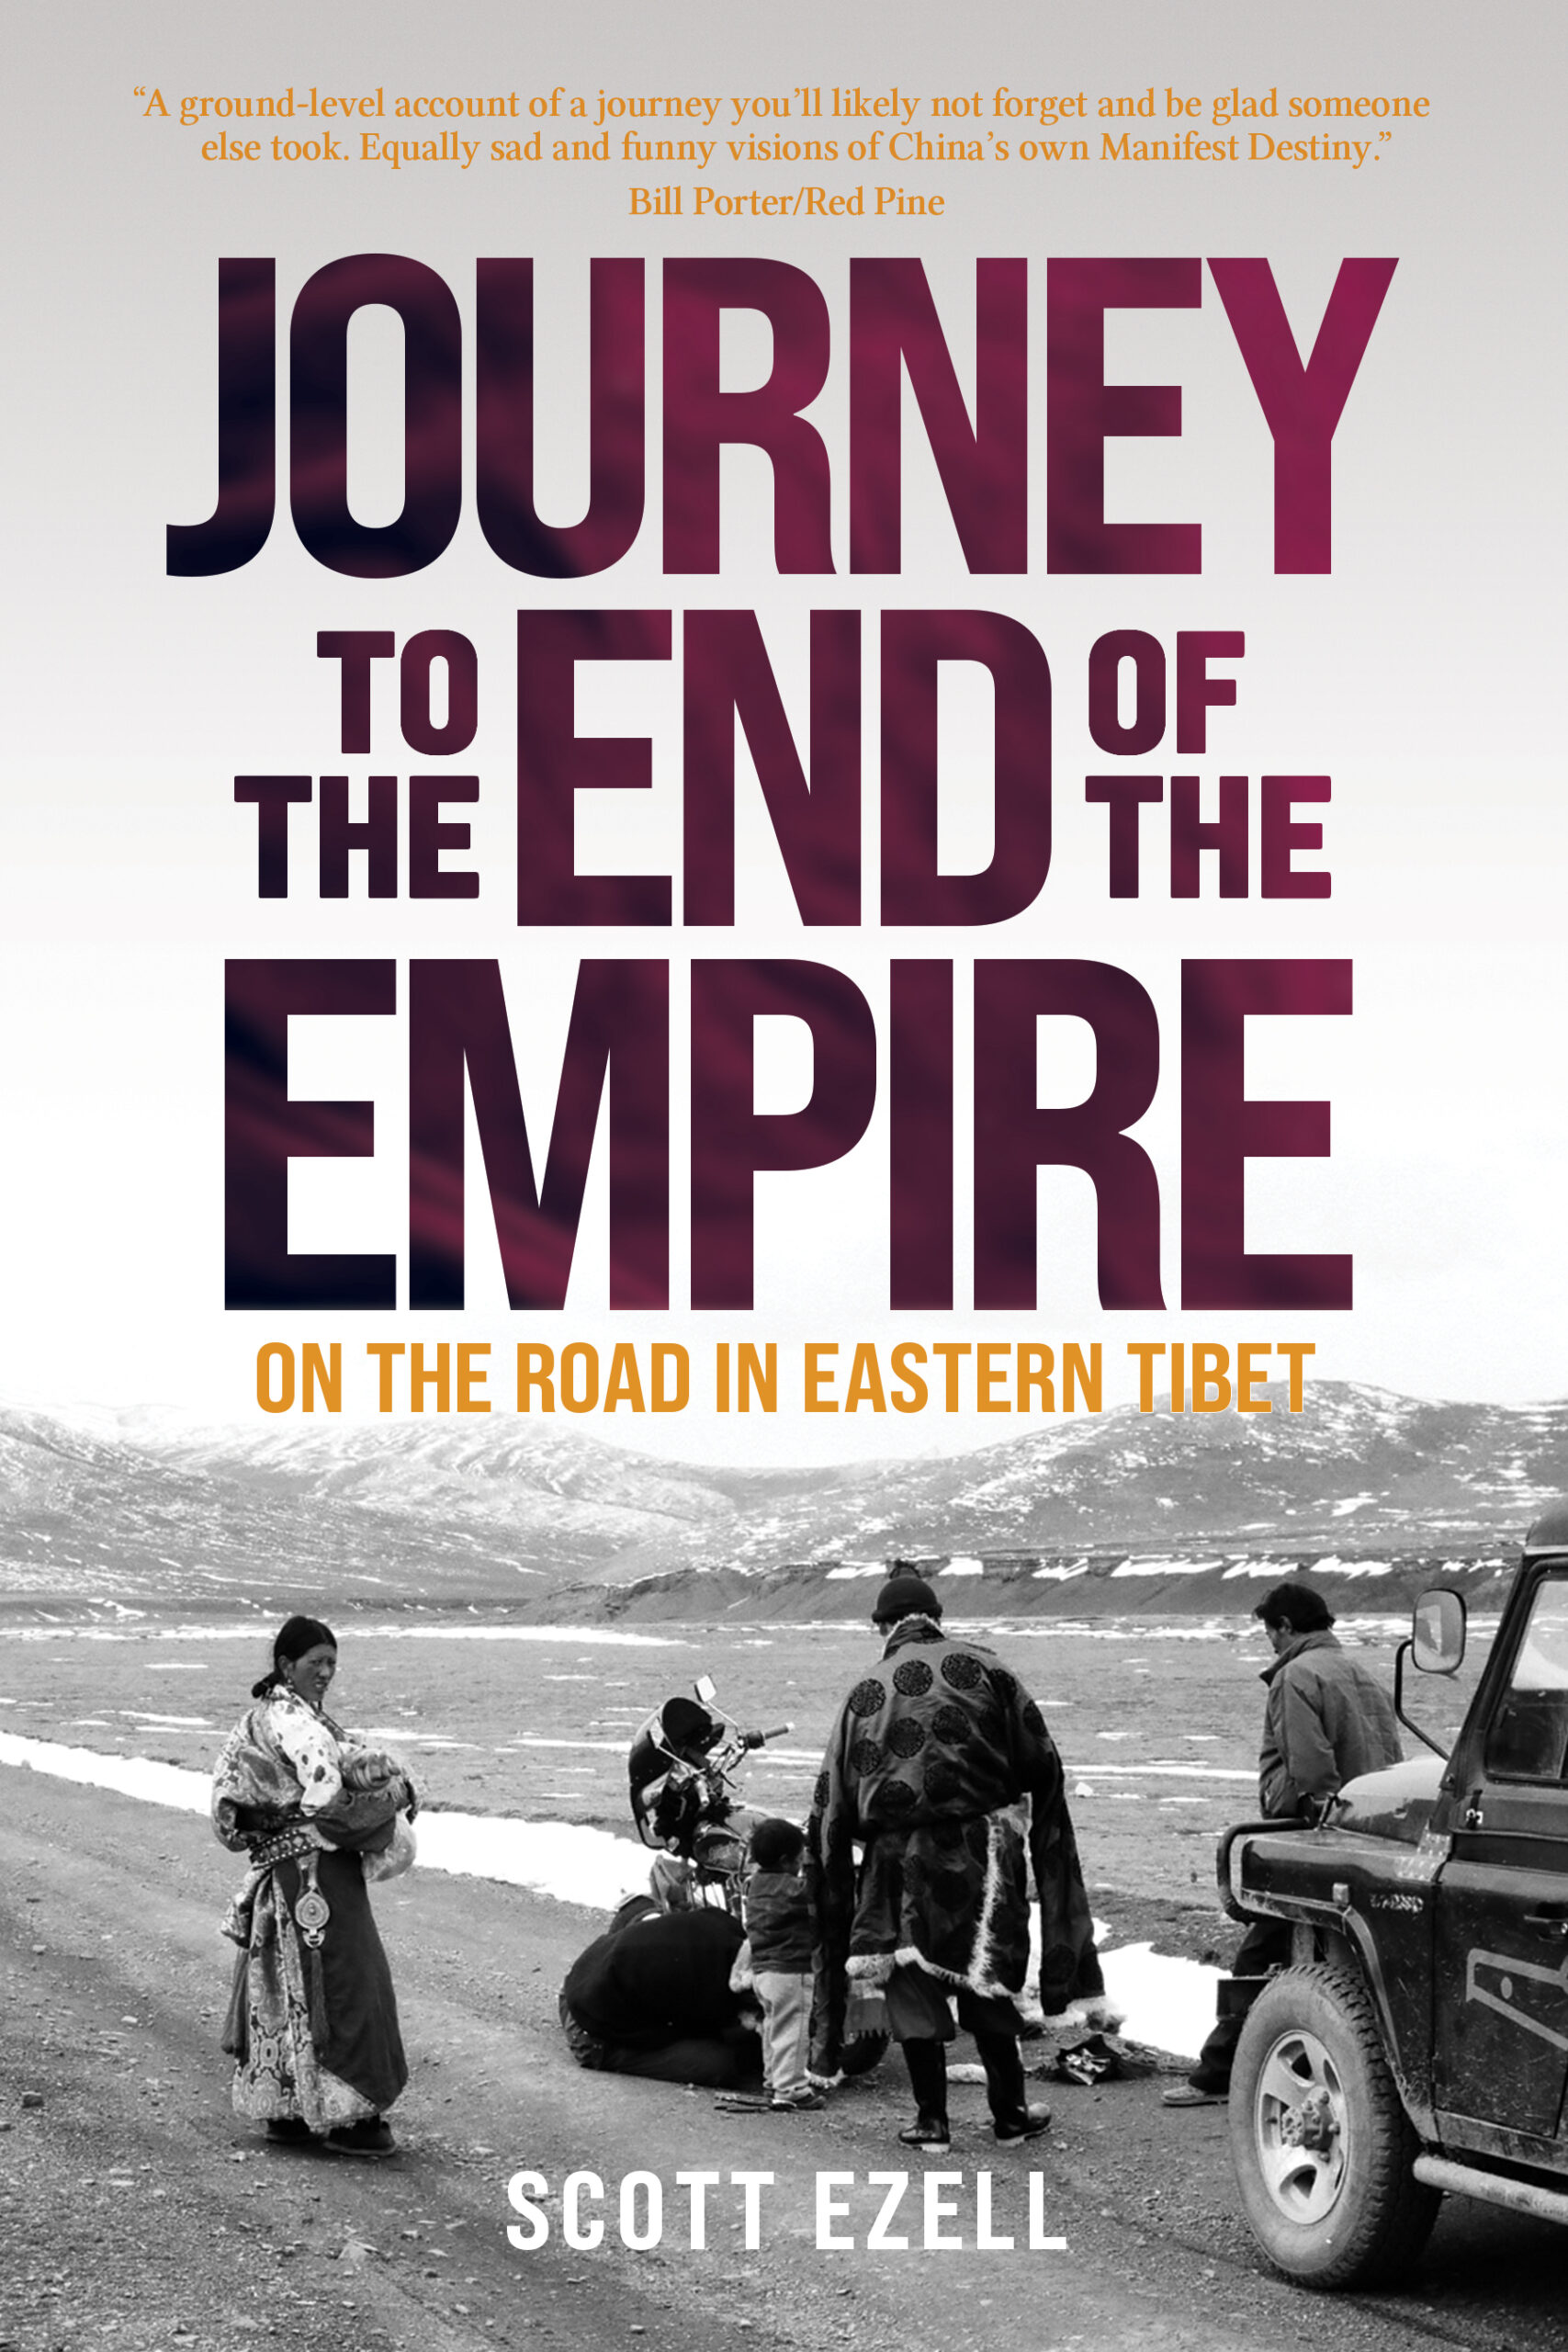 The cover of Journey to the End of the Empire, by Scott Ezell